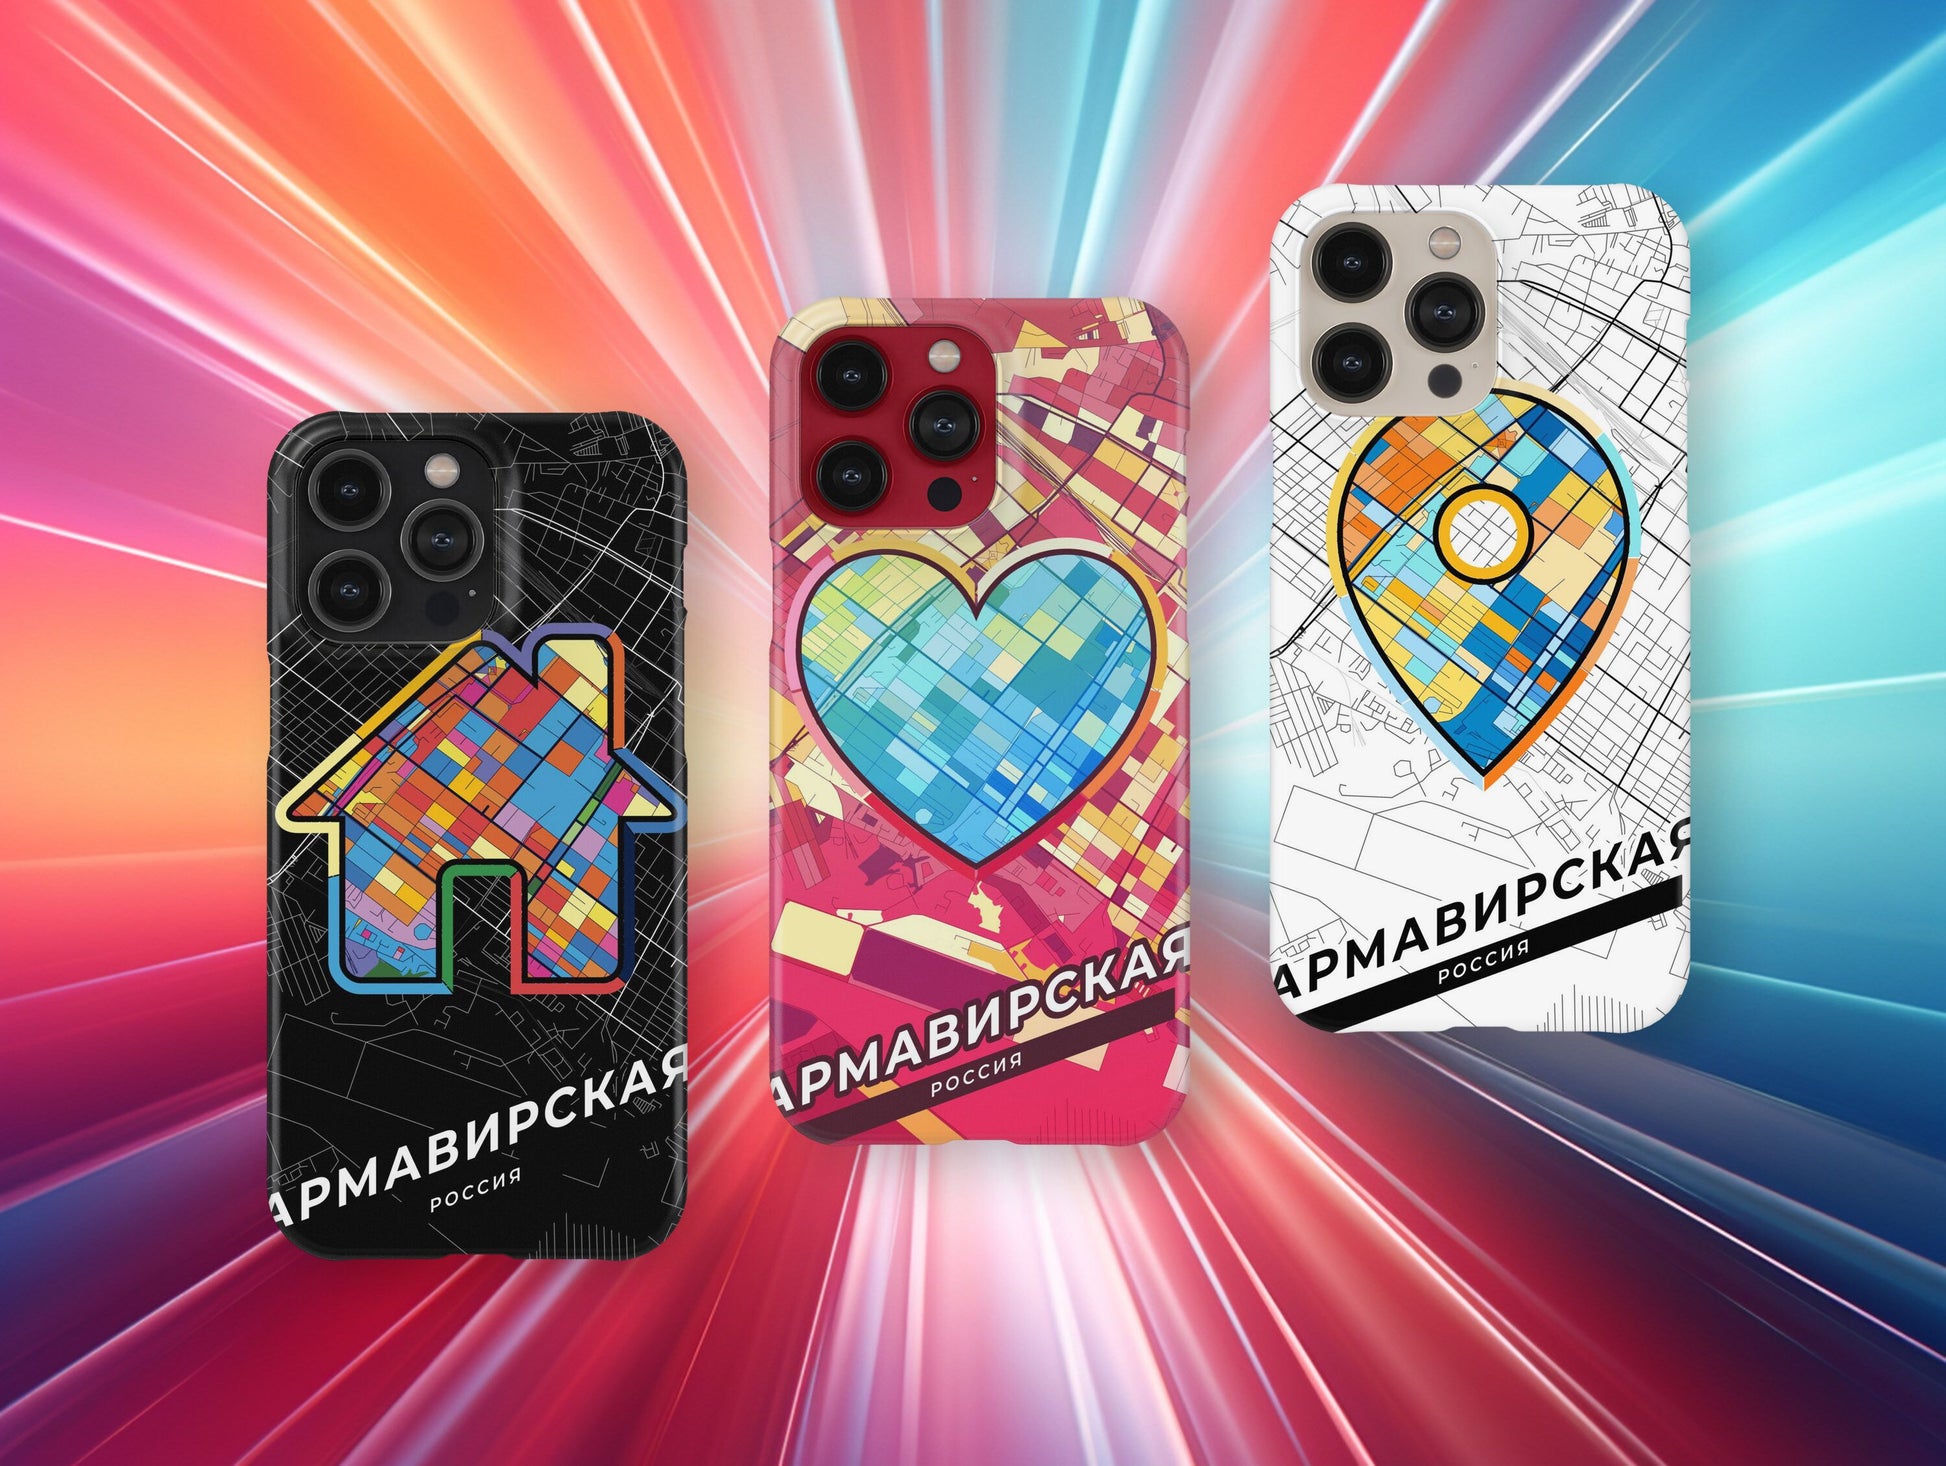 Armavir Russia slim phone case with colorful icon. Birthday, wedding or housewarming gift. Couple match cases.